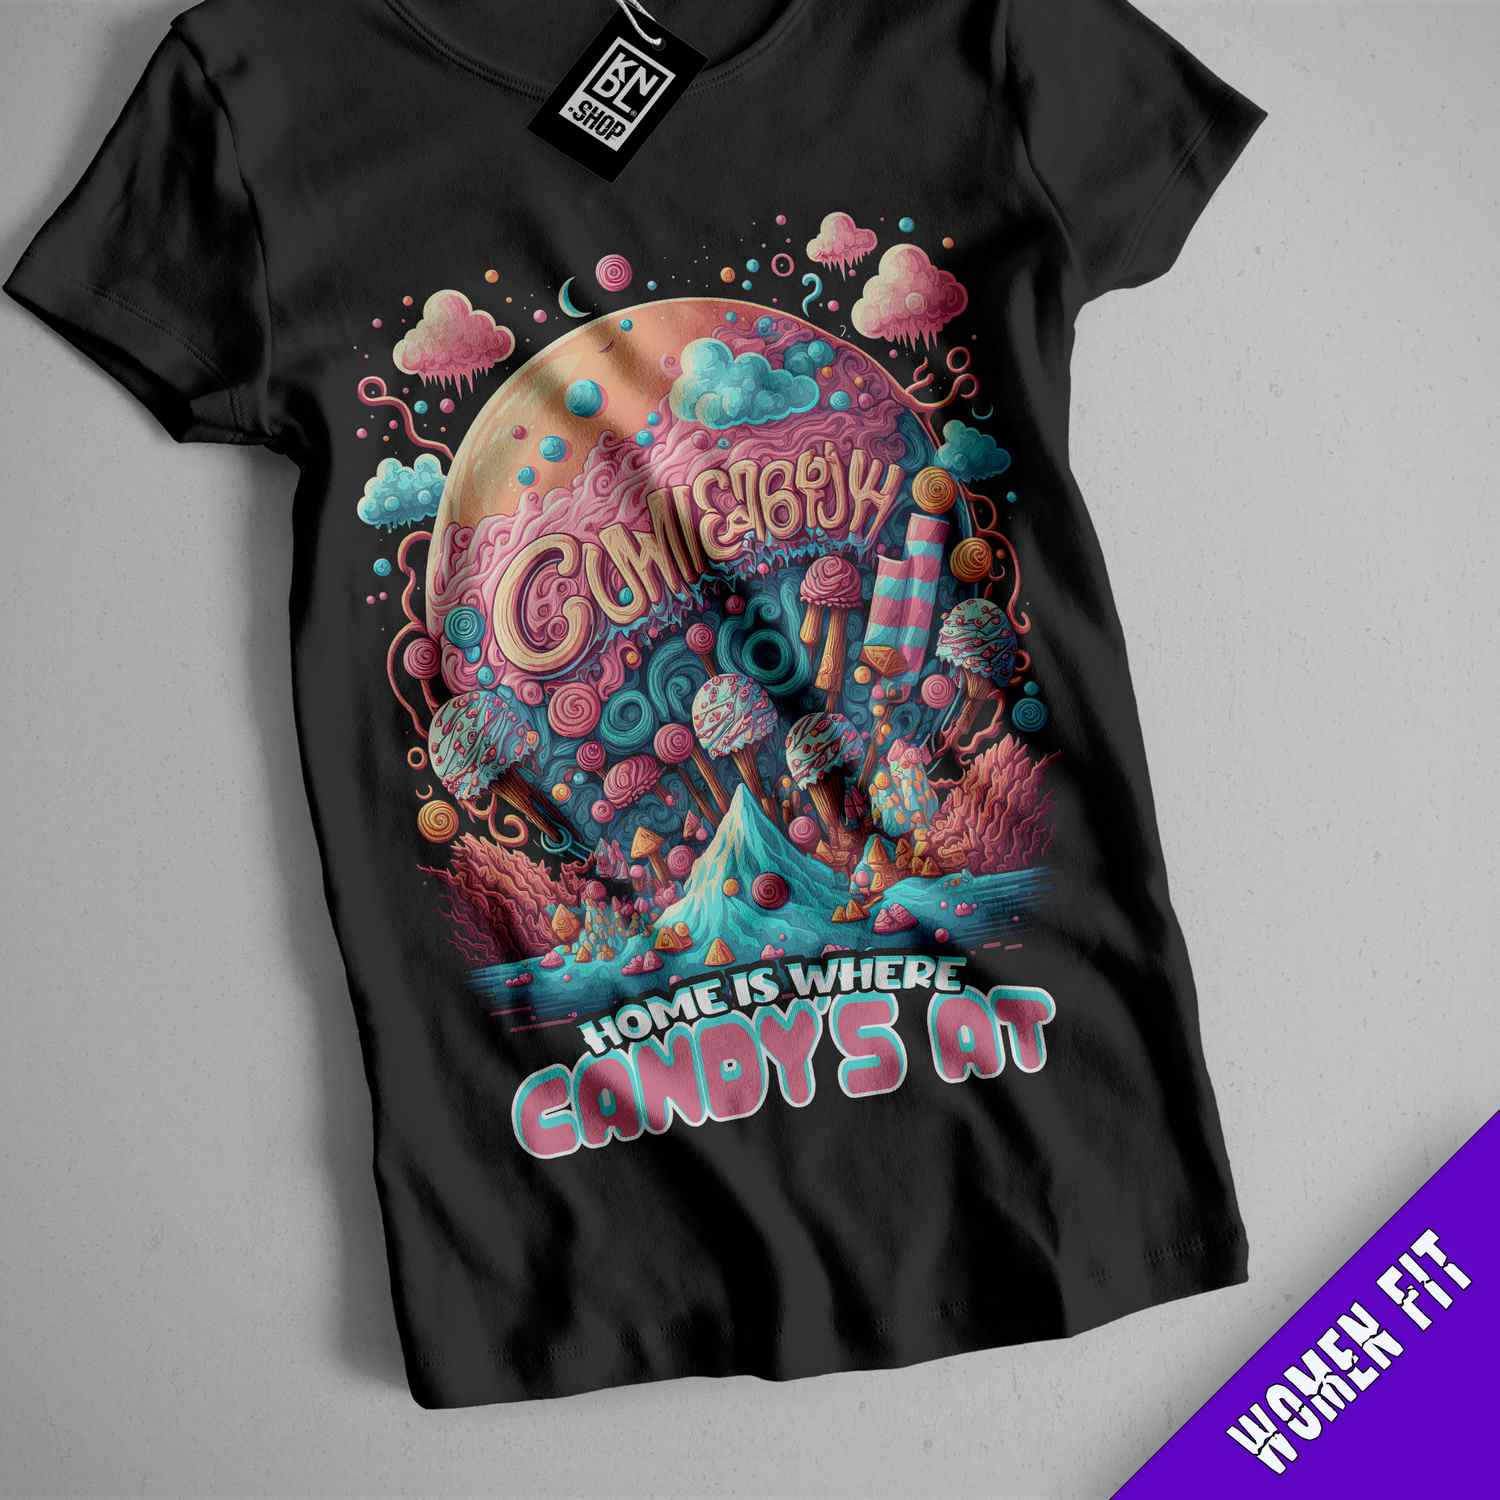 a black t - shirt with an image of a candy land